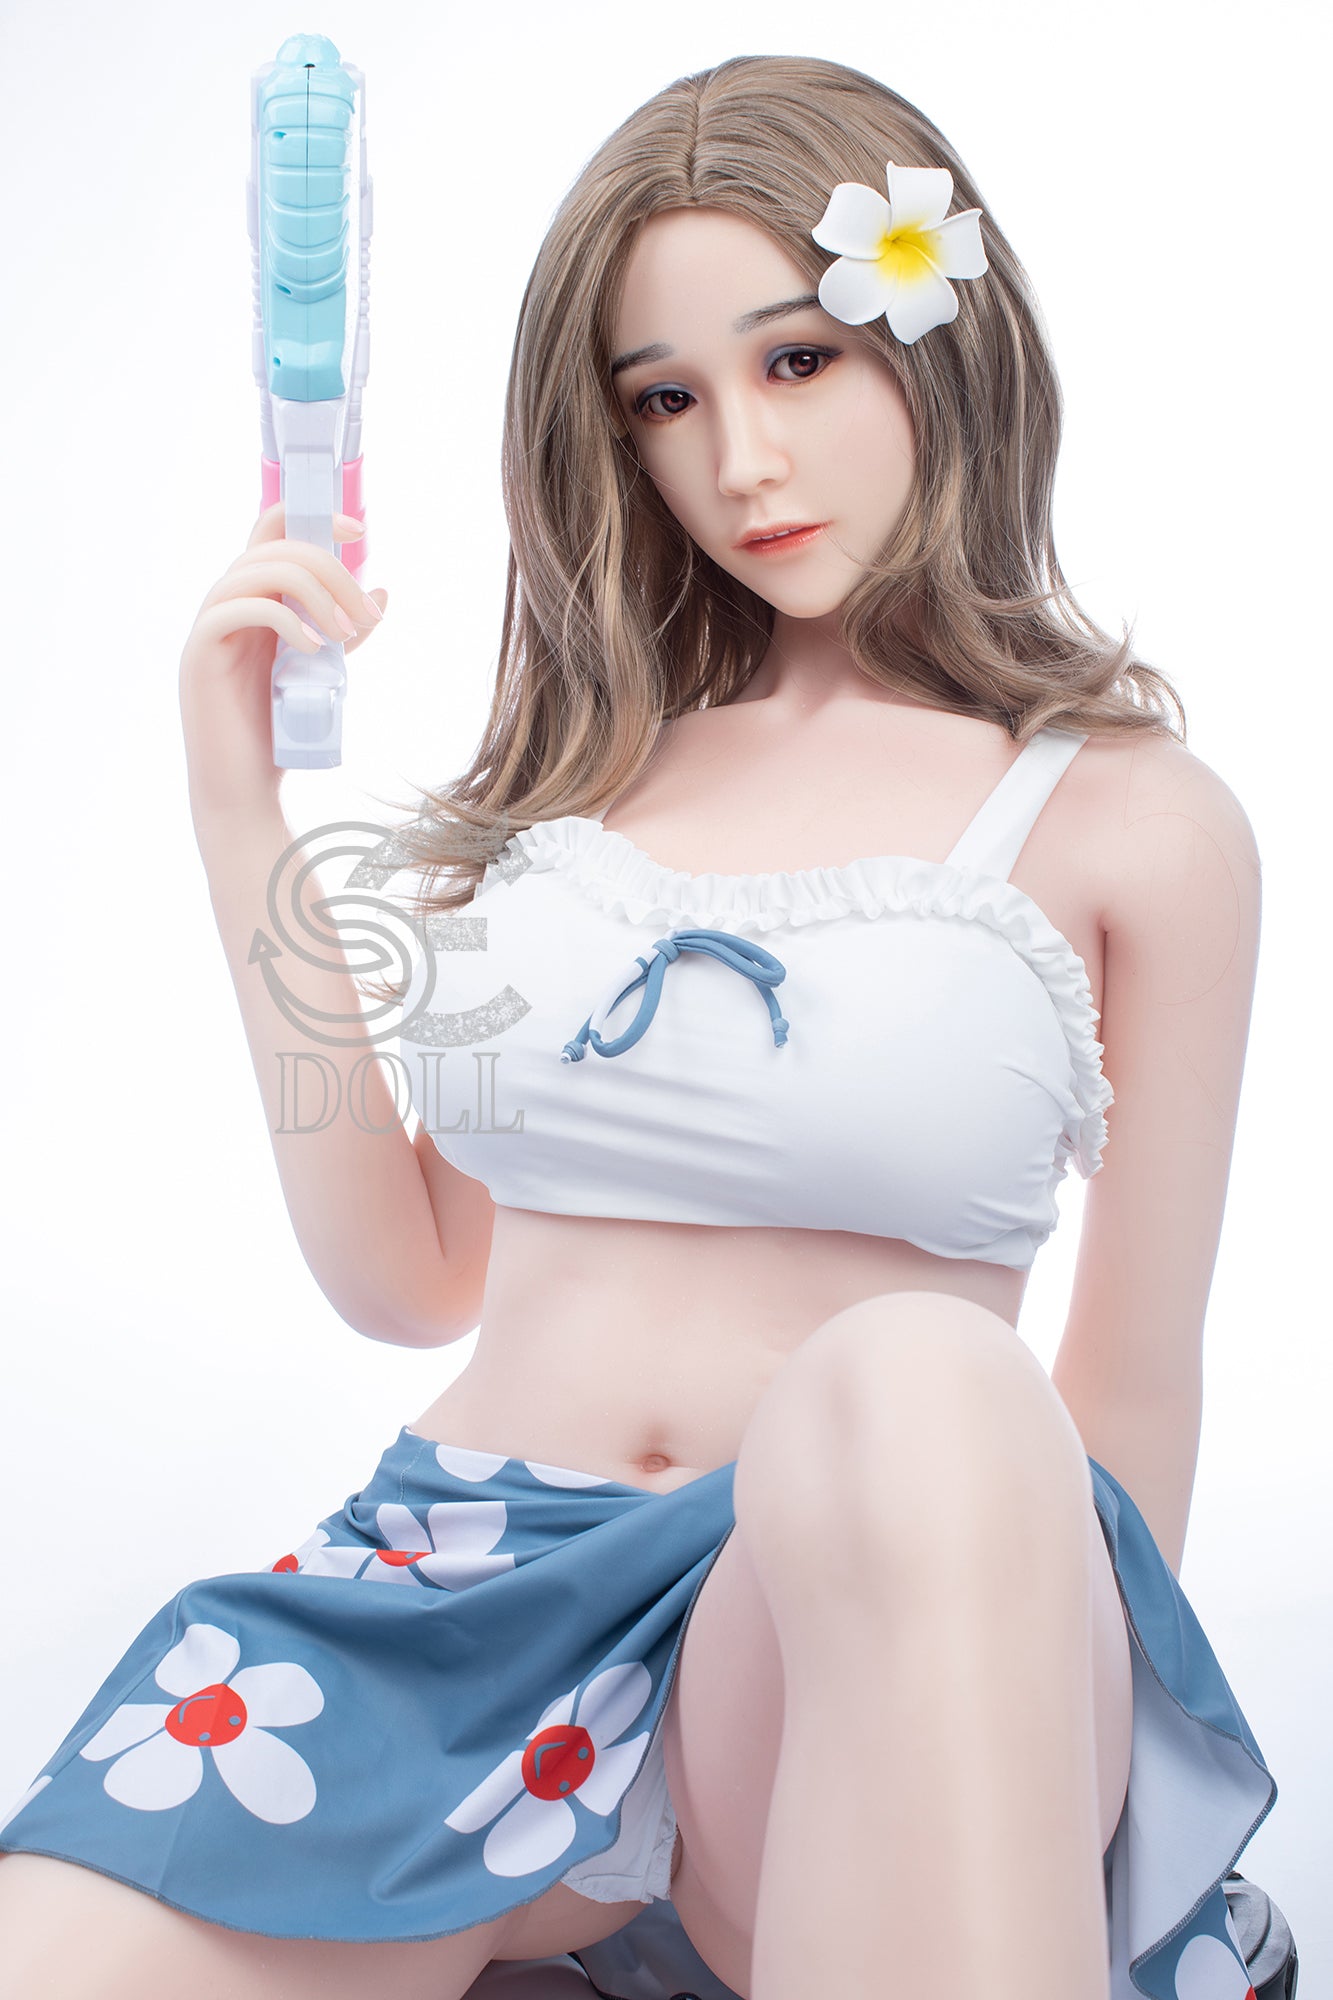 SEDOLL 160 cm C Silicone - Celina | Buy Sex Dolls at DOLLS ACTUALLY